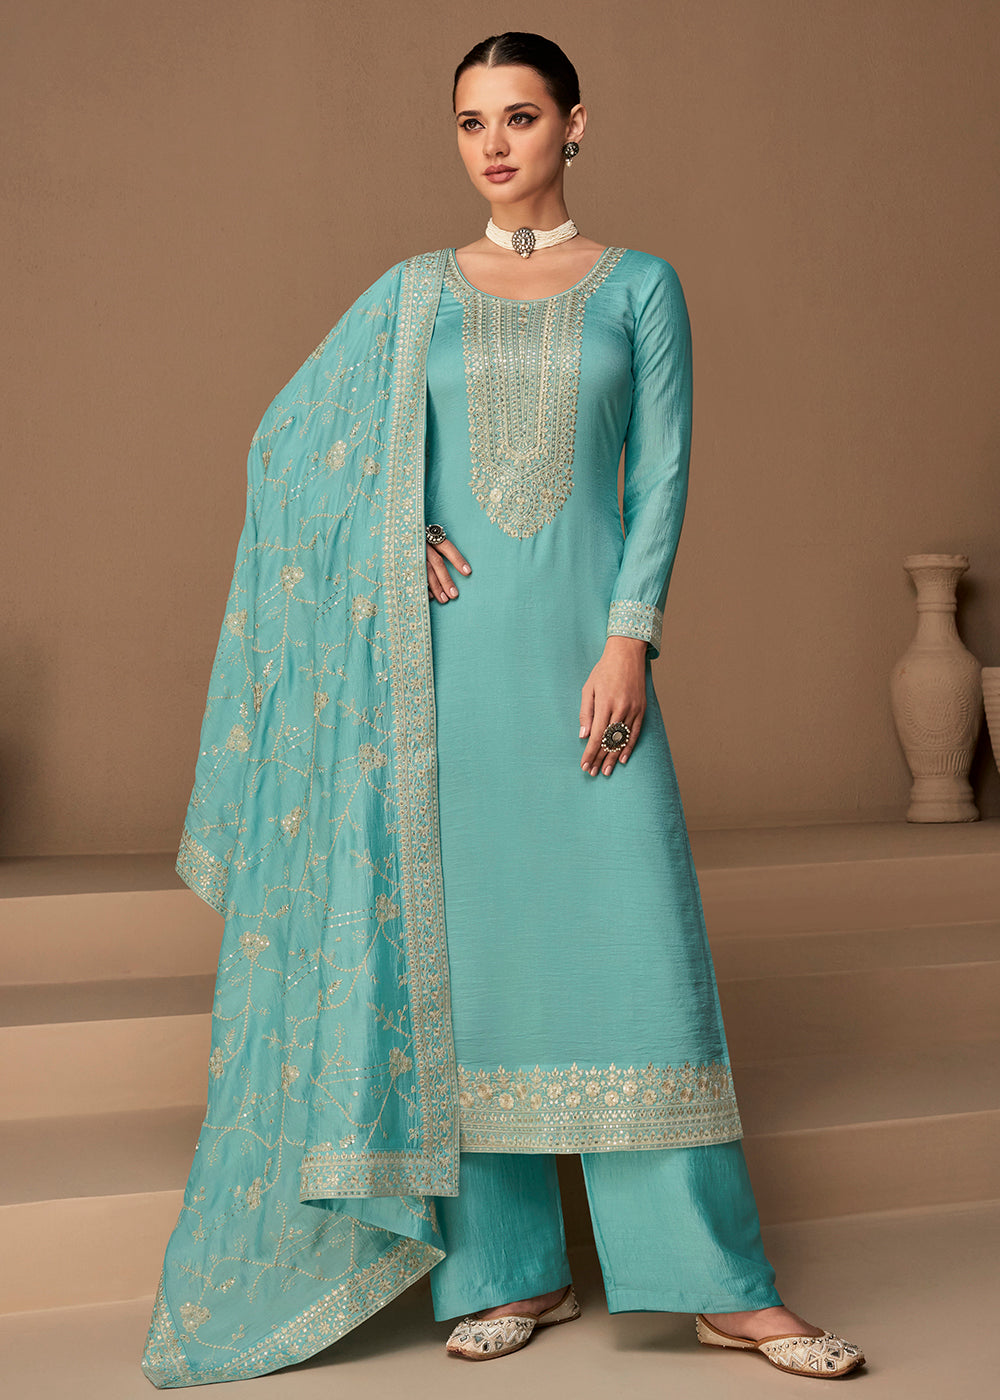 Buy Now Beautiful Aqua Blue & Gold Embroidered Premium Silk Salwar Suit Online in USA, UK, Canada, Germany, Australia & Worldwide at Empress Clothing. 